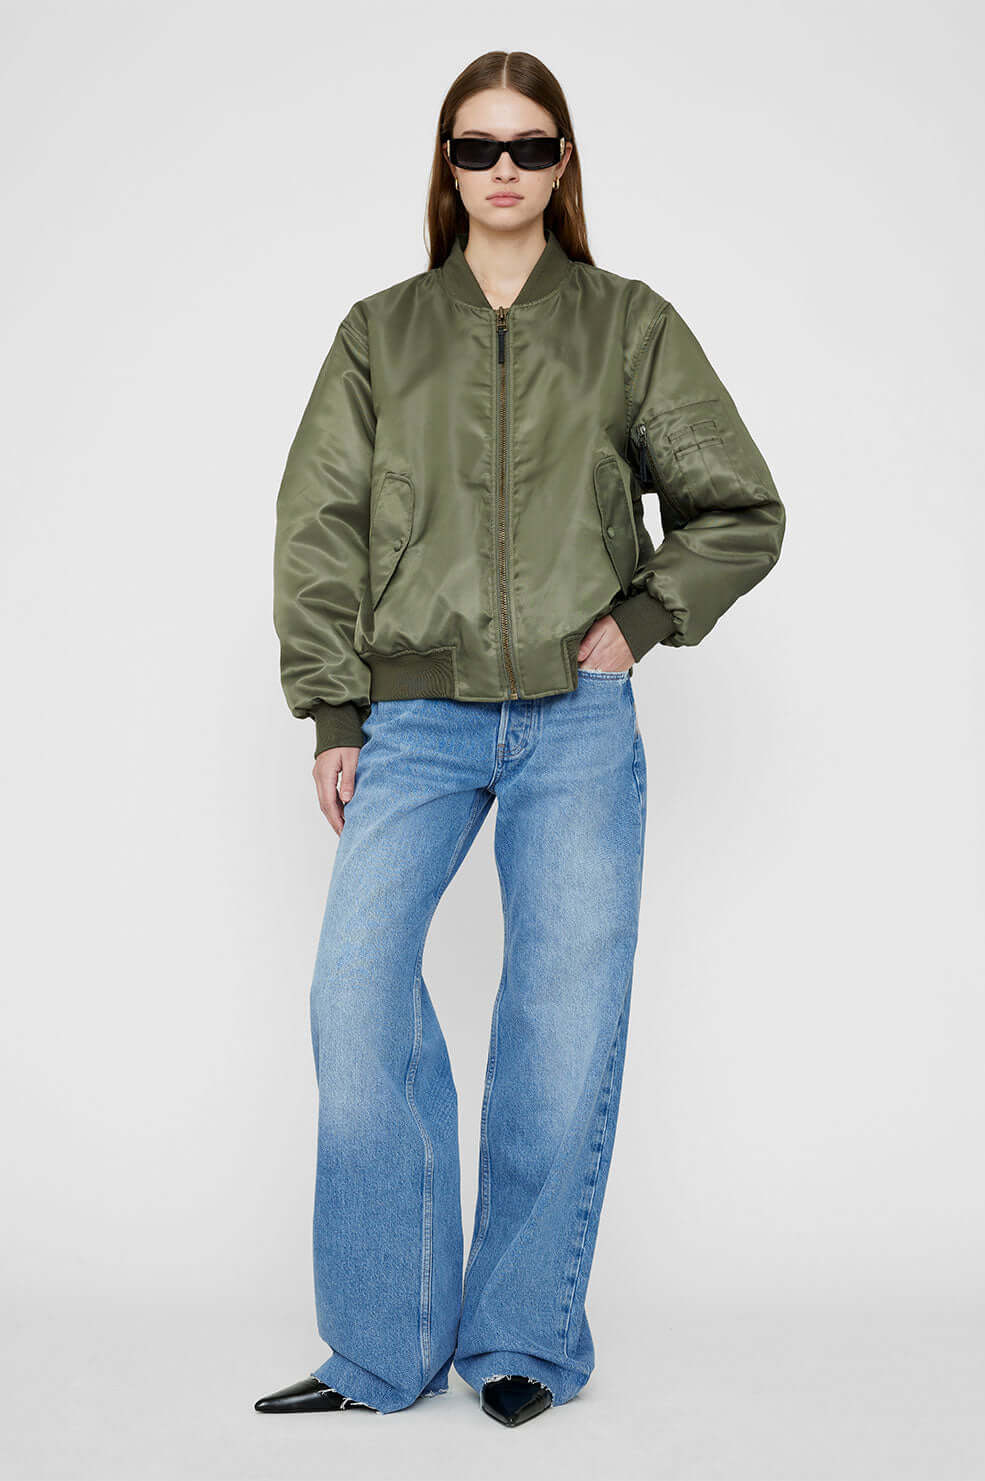 Anine Bing Leon Bomber in Army Green available at The New Trend